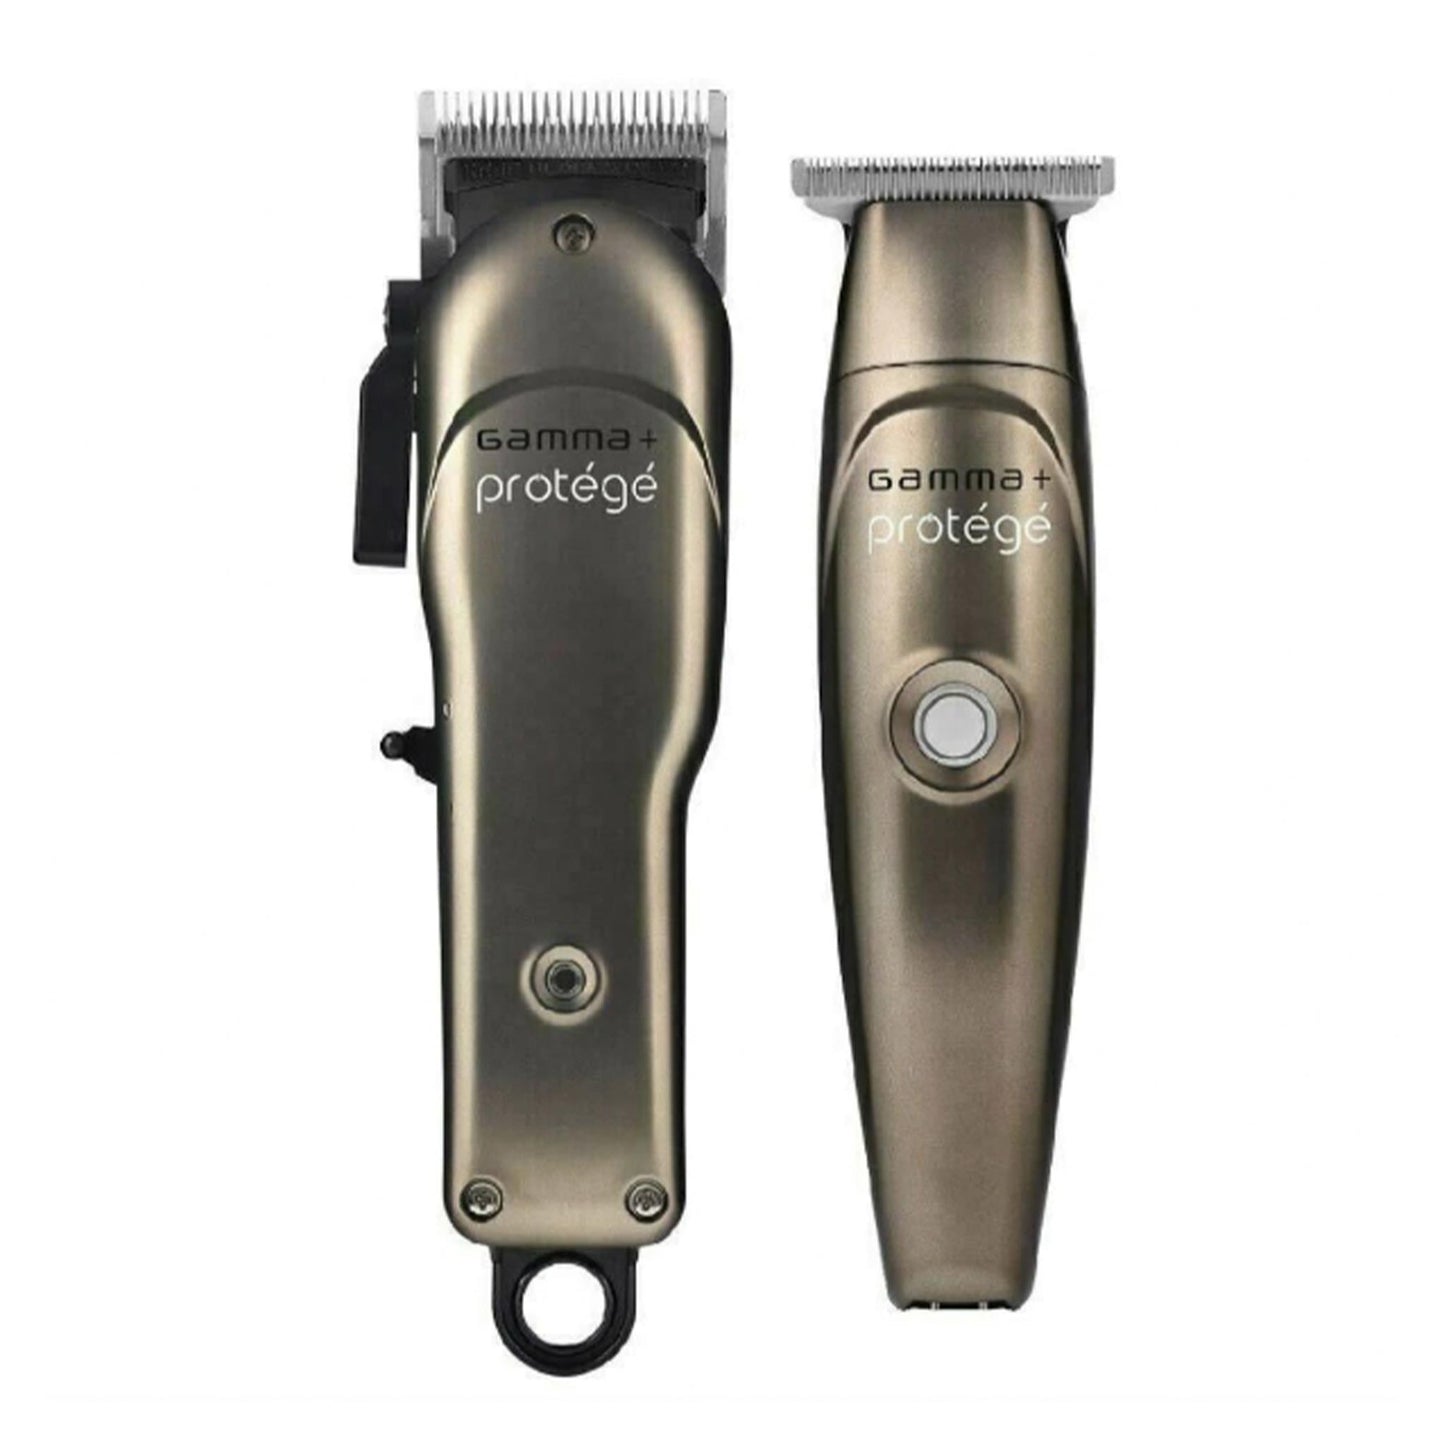 Gamma+ Protege Combo pack – Trimmer & Clipper